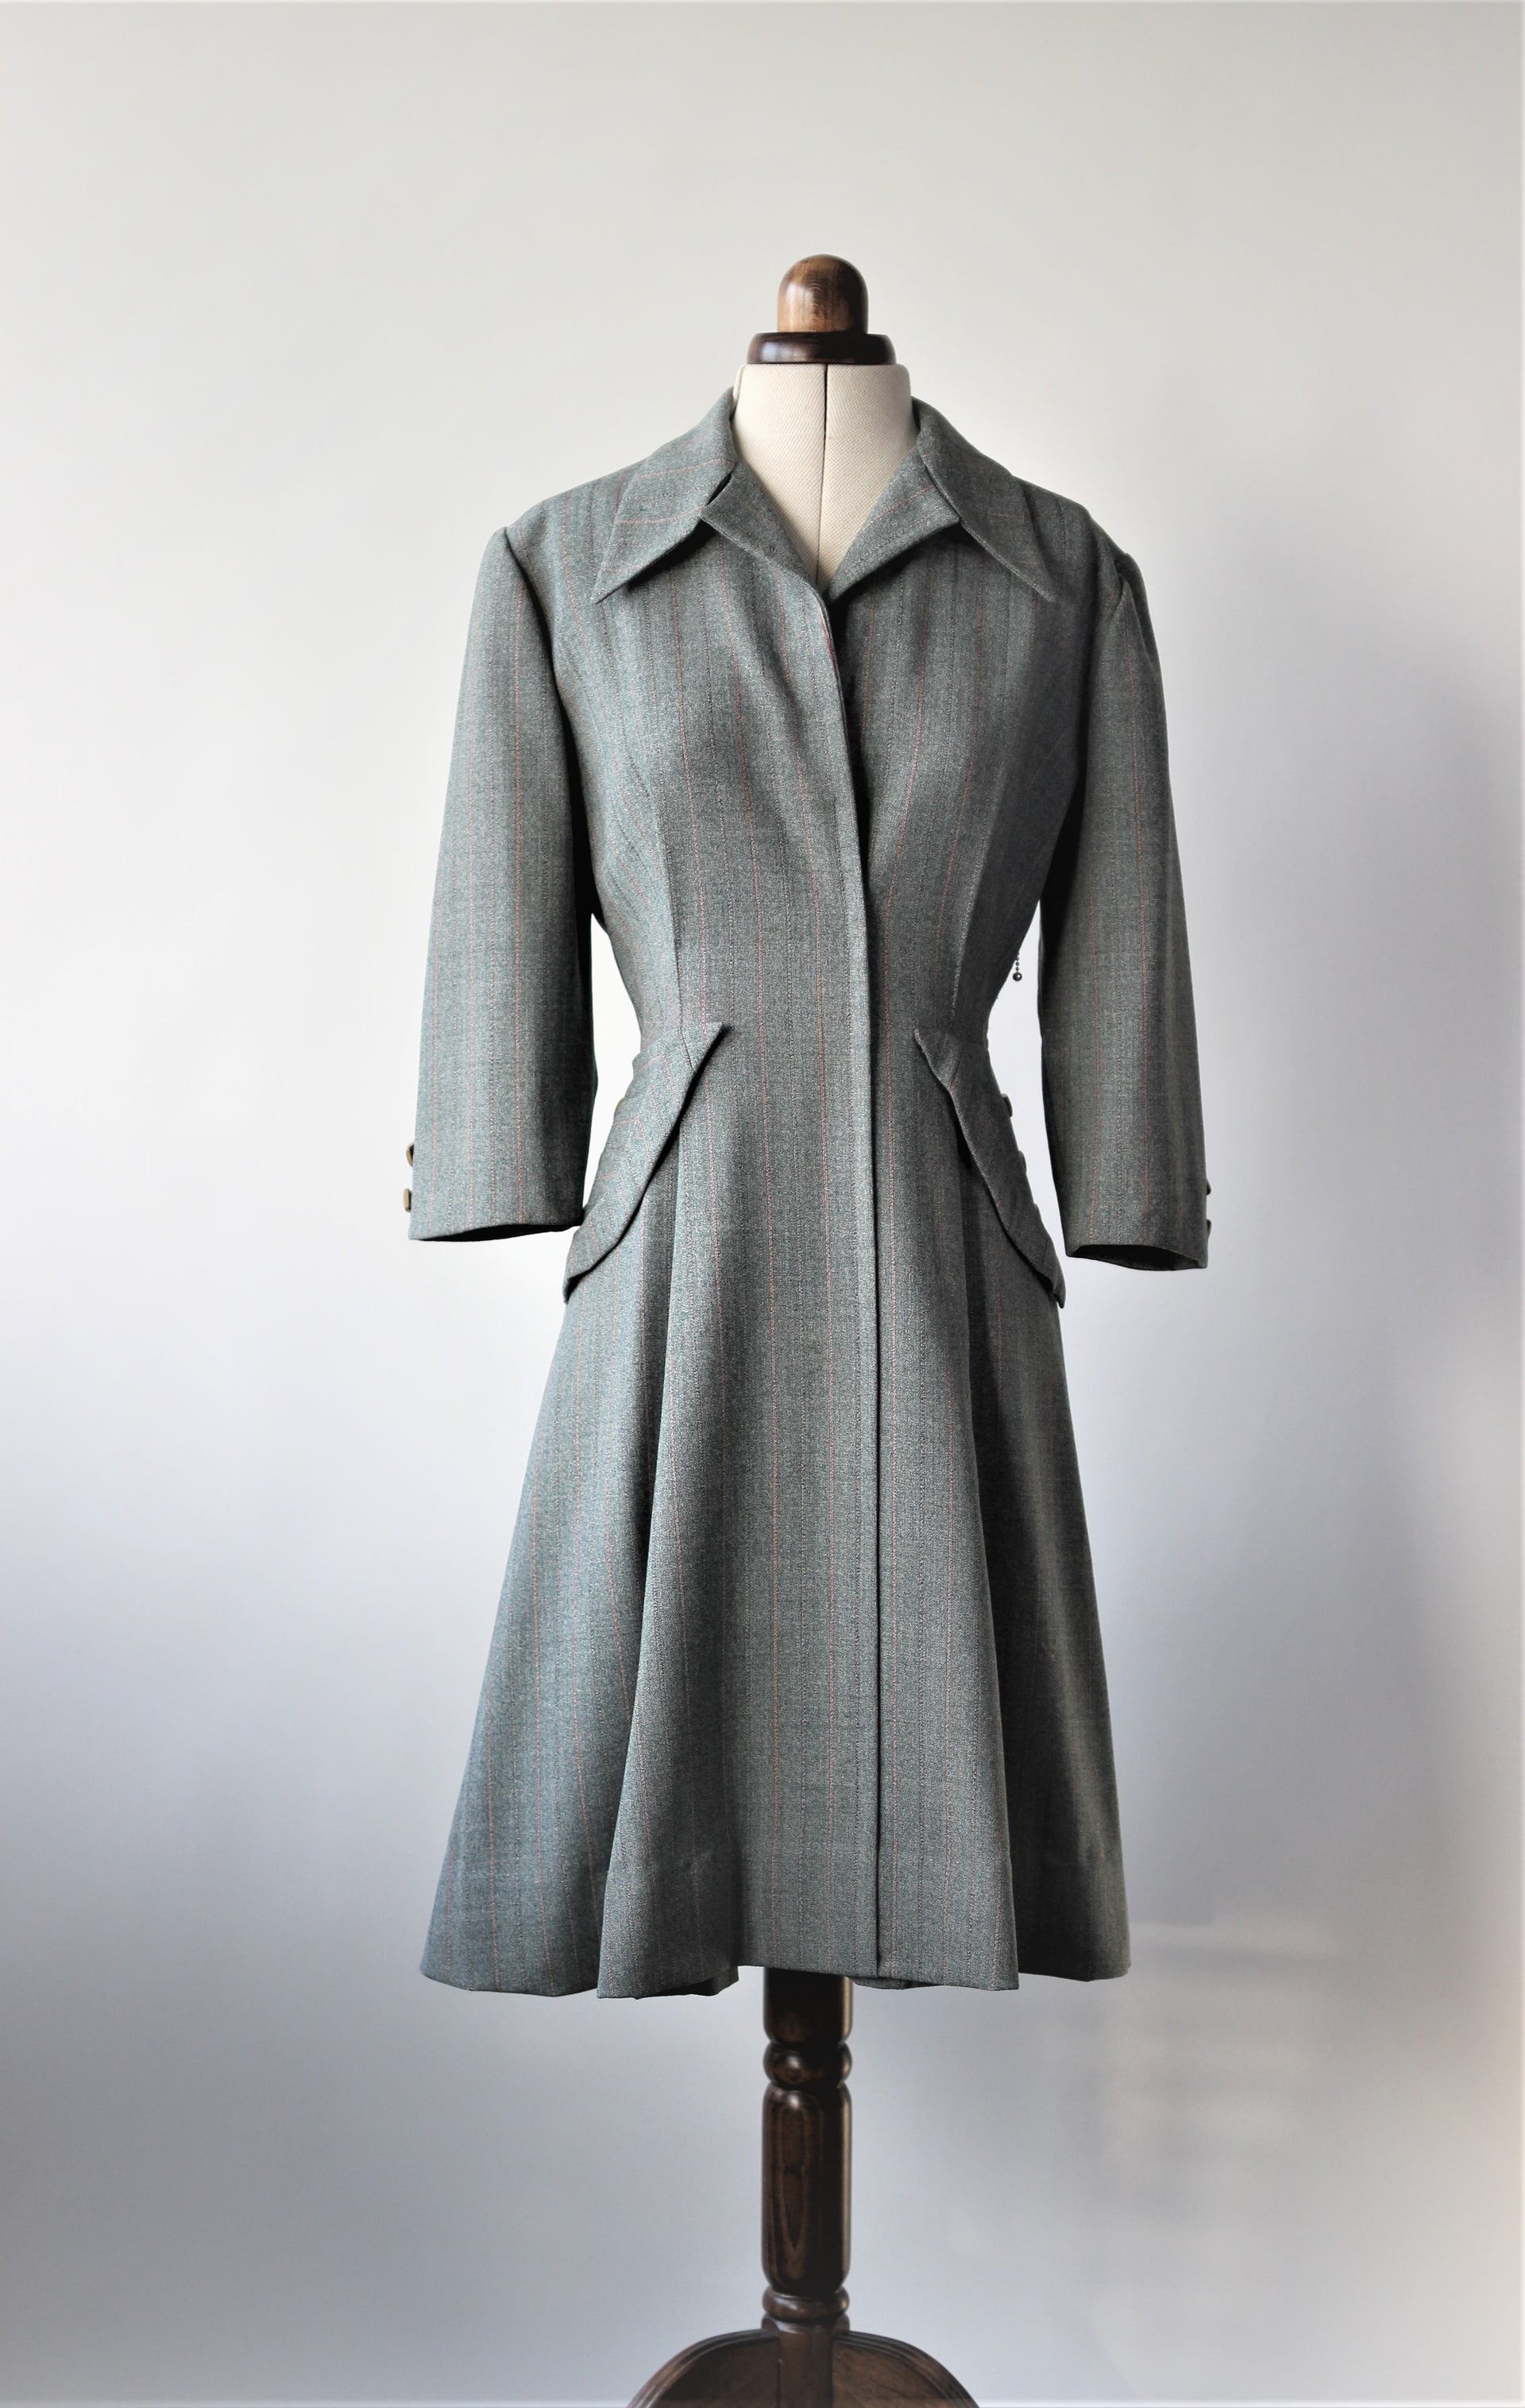 RARE 1940s Wool dress in Grey with Pink Stripes//Size M